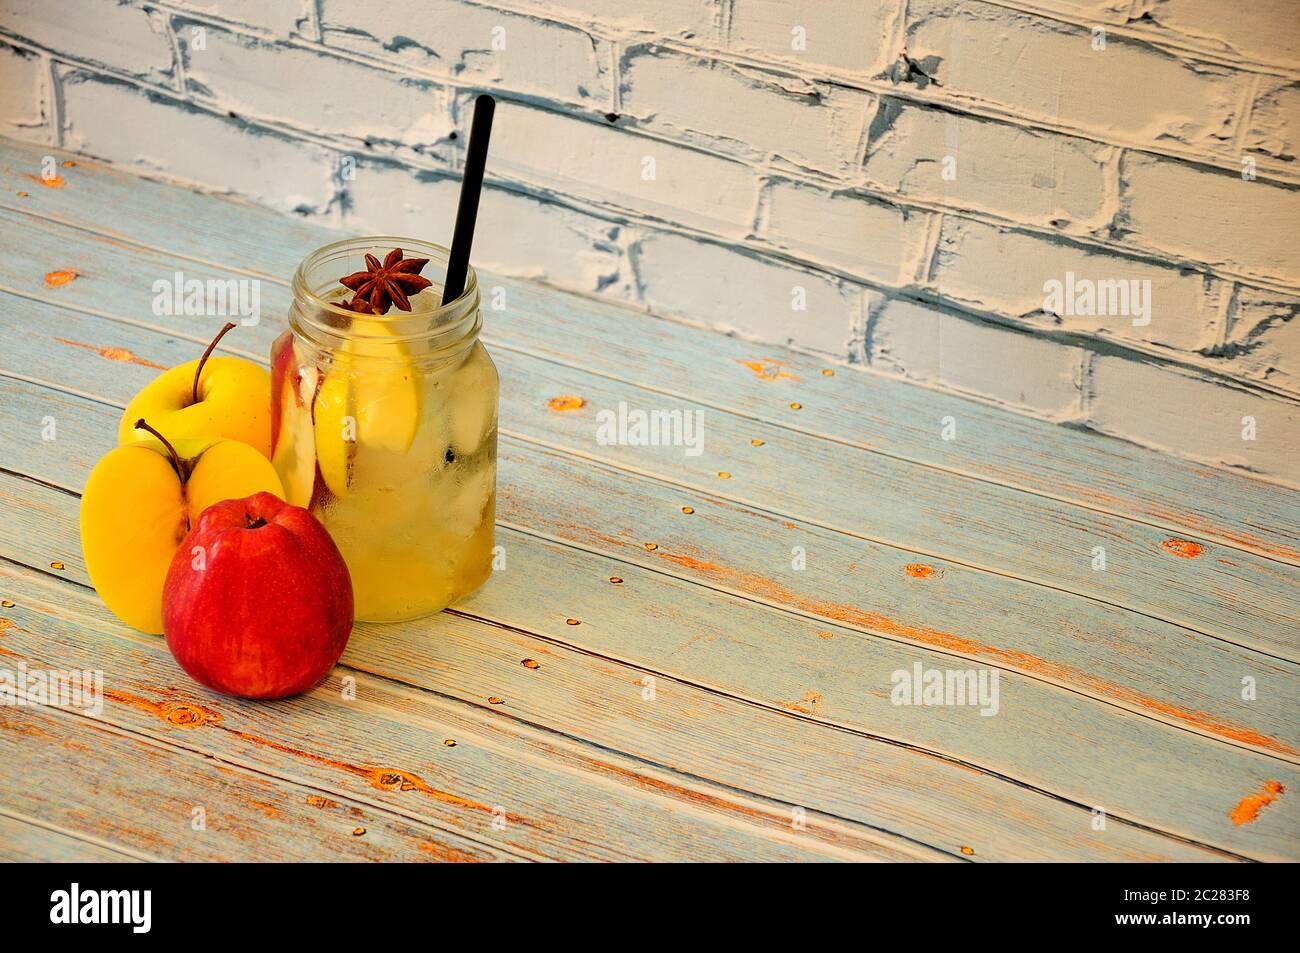 Red and yellow apples stand on a wooden table by the glass with juice and ice. Close-up. Stock Photo